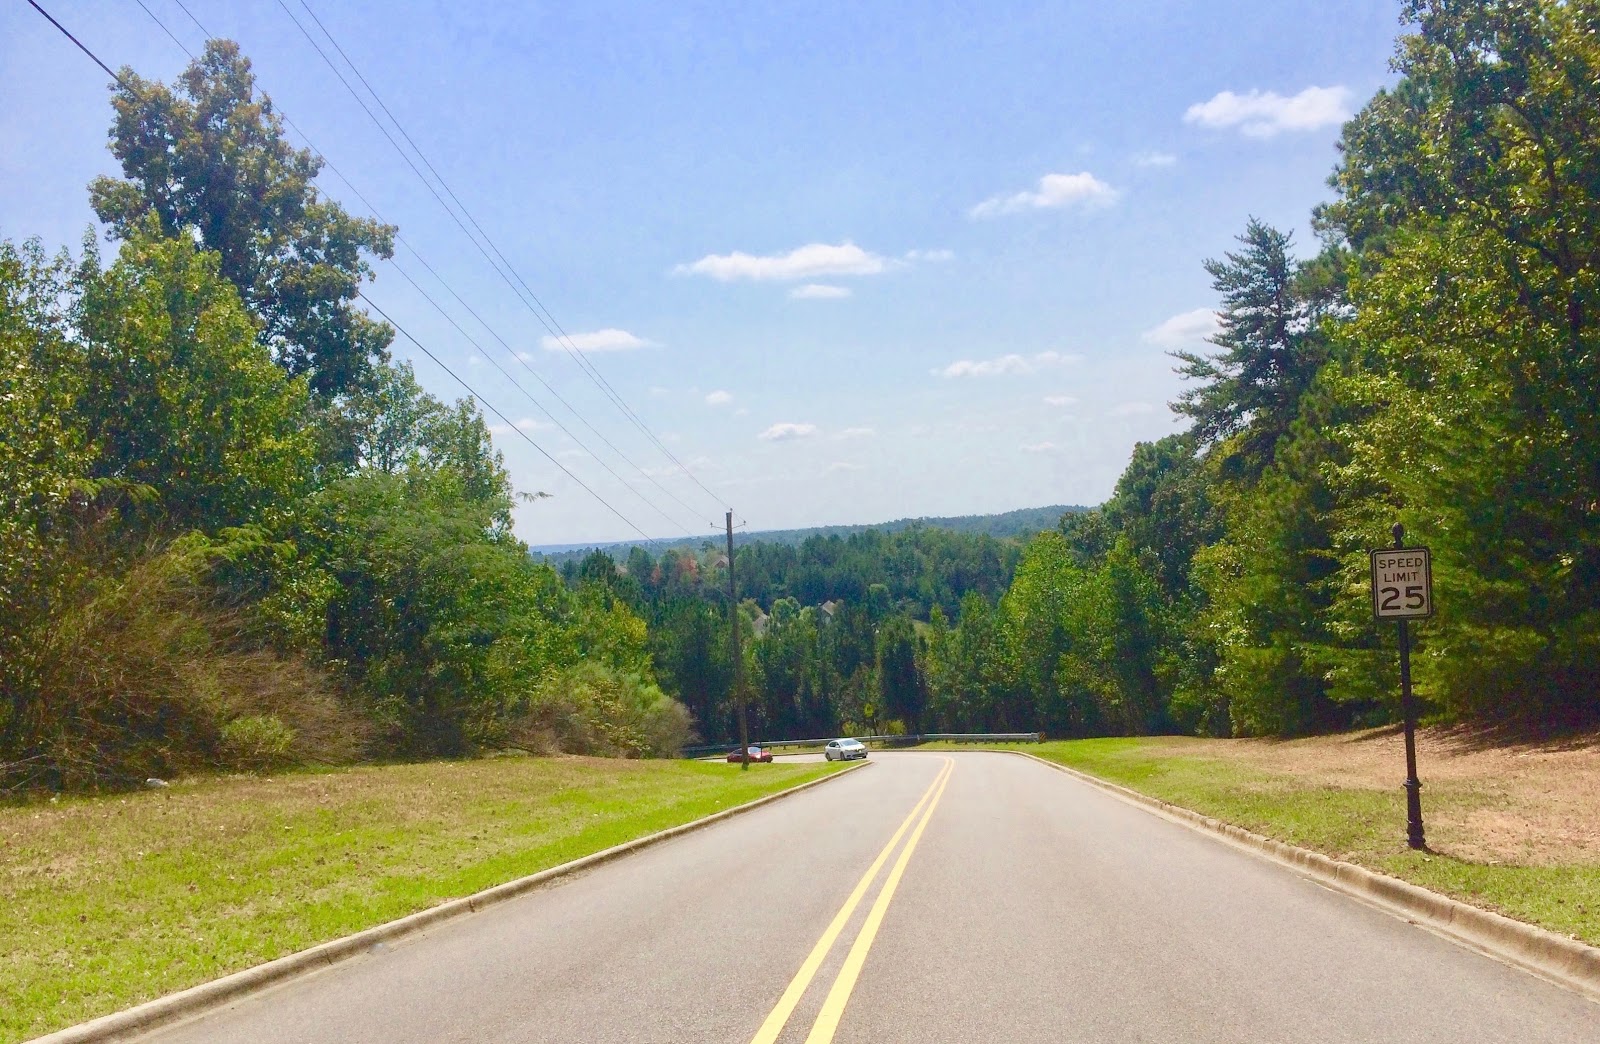 Birmingham, Trussville, Driver's Way, Alabama, Mary Tyler Road, drives, scenery